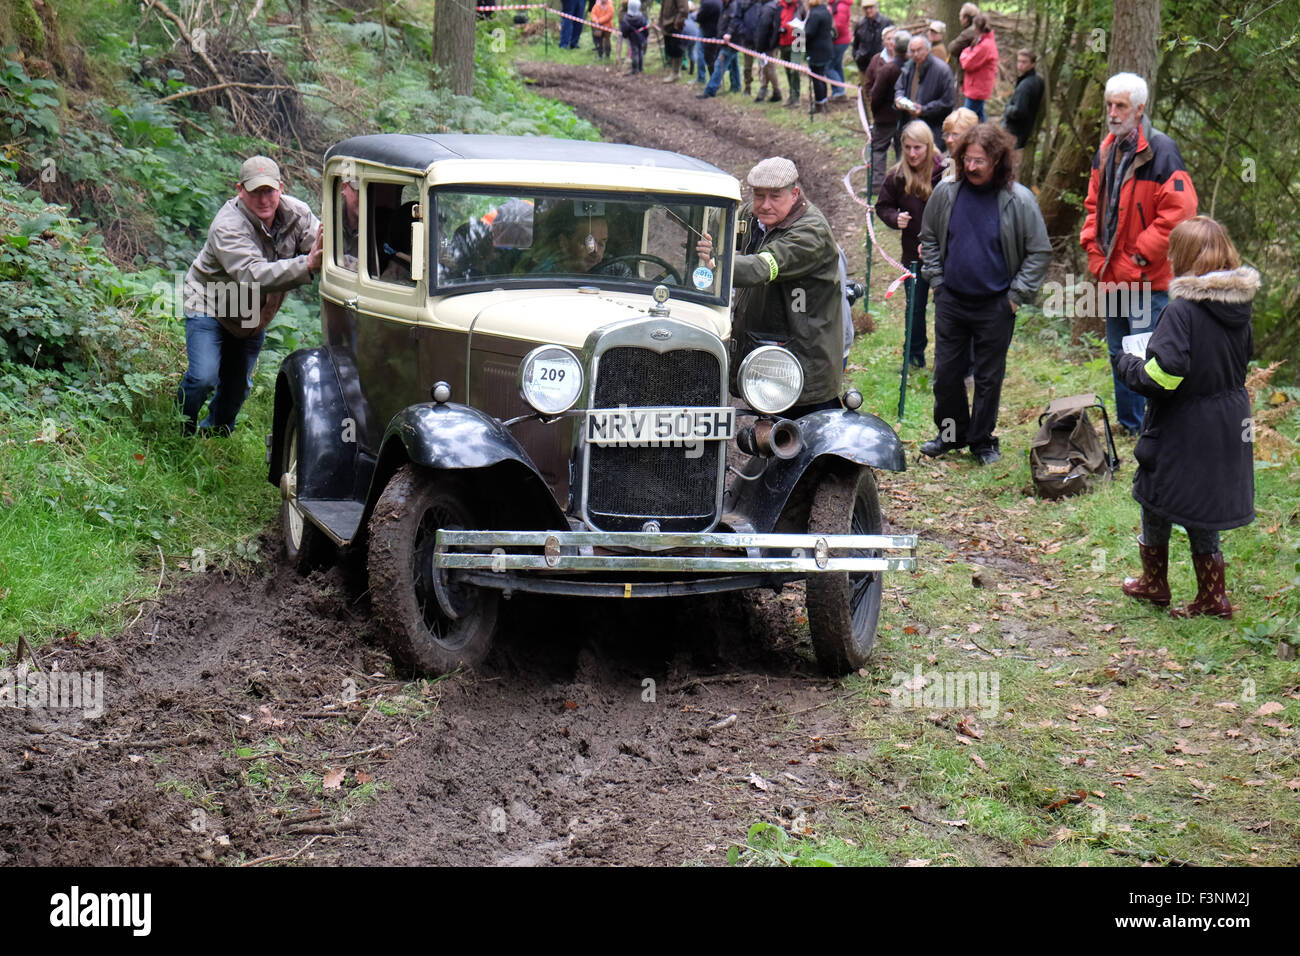 New Radnor, Powys, Wales - Saturday 10th October 2015 - The Vintage Sports Car Club ( VSCC ) hill climb trial challenge on The Smatcher a steep wooded hill just outside New Radnor. Competitors score points the further they drive up the steep hill with 25 points being awarded for reaching the top. Shown here is a 1930 Ford Model 'A' struggling on the muddy climb. News Stock Photo